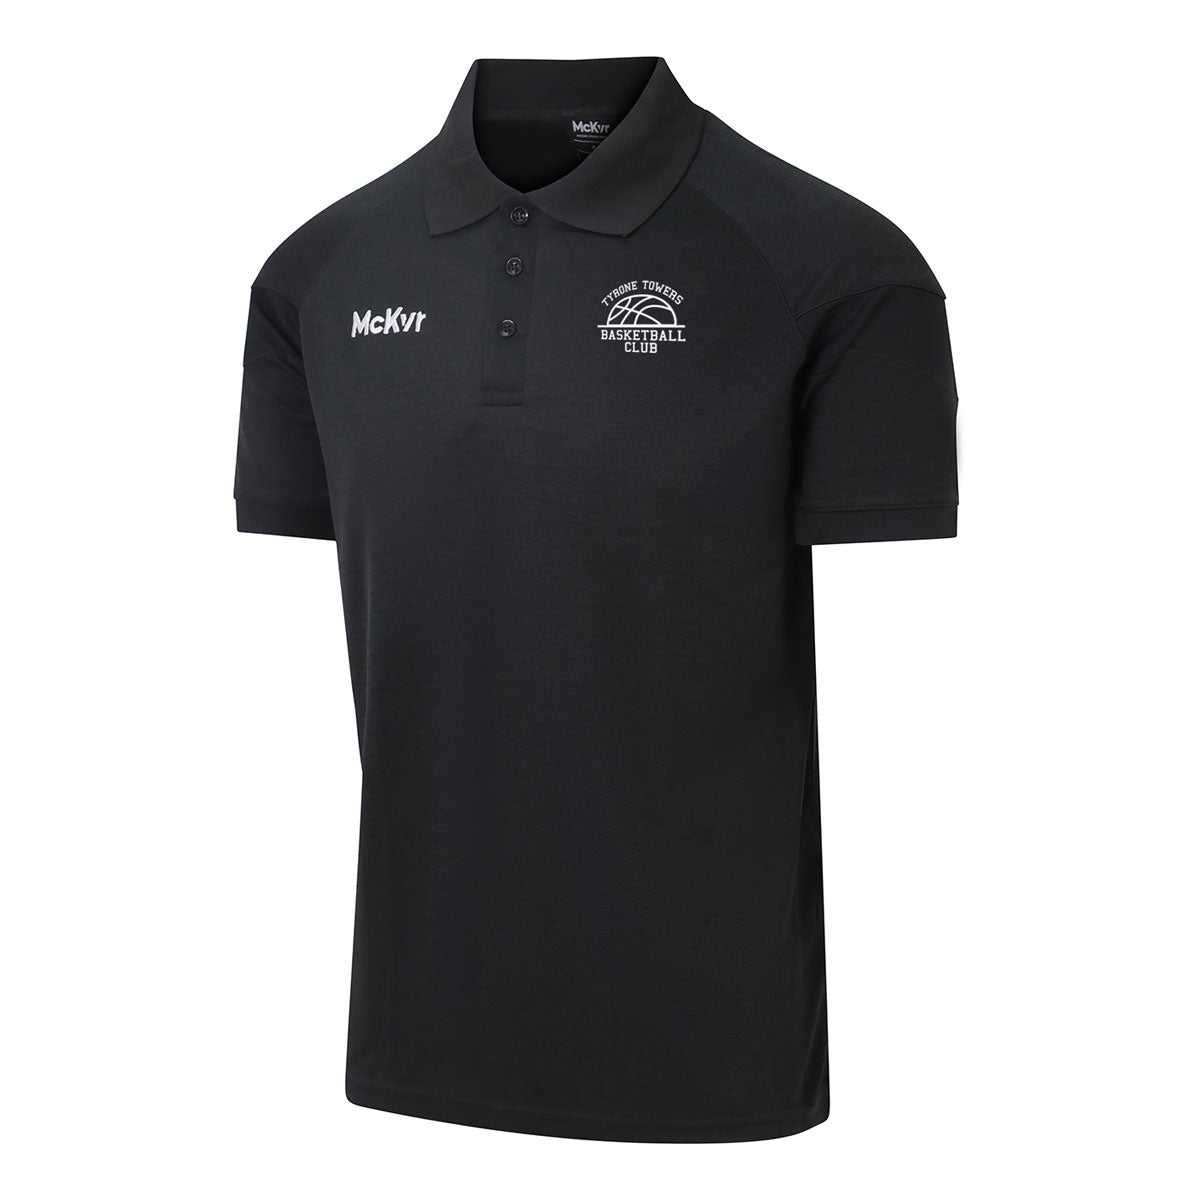 Mc Keever Tyrone Towers Basketball Core 22 Polo Top - Adult - Black